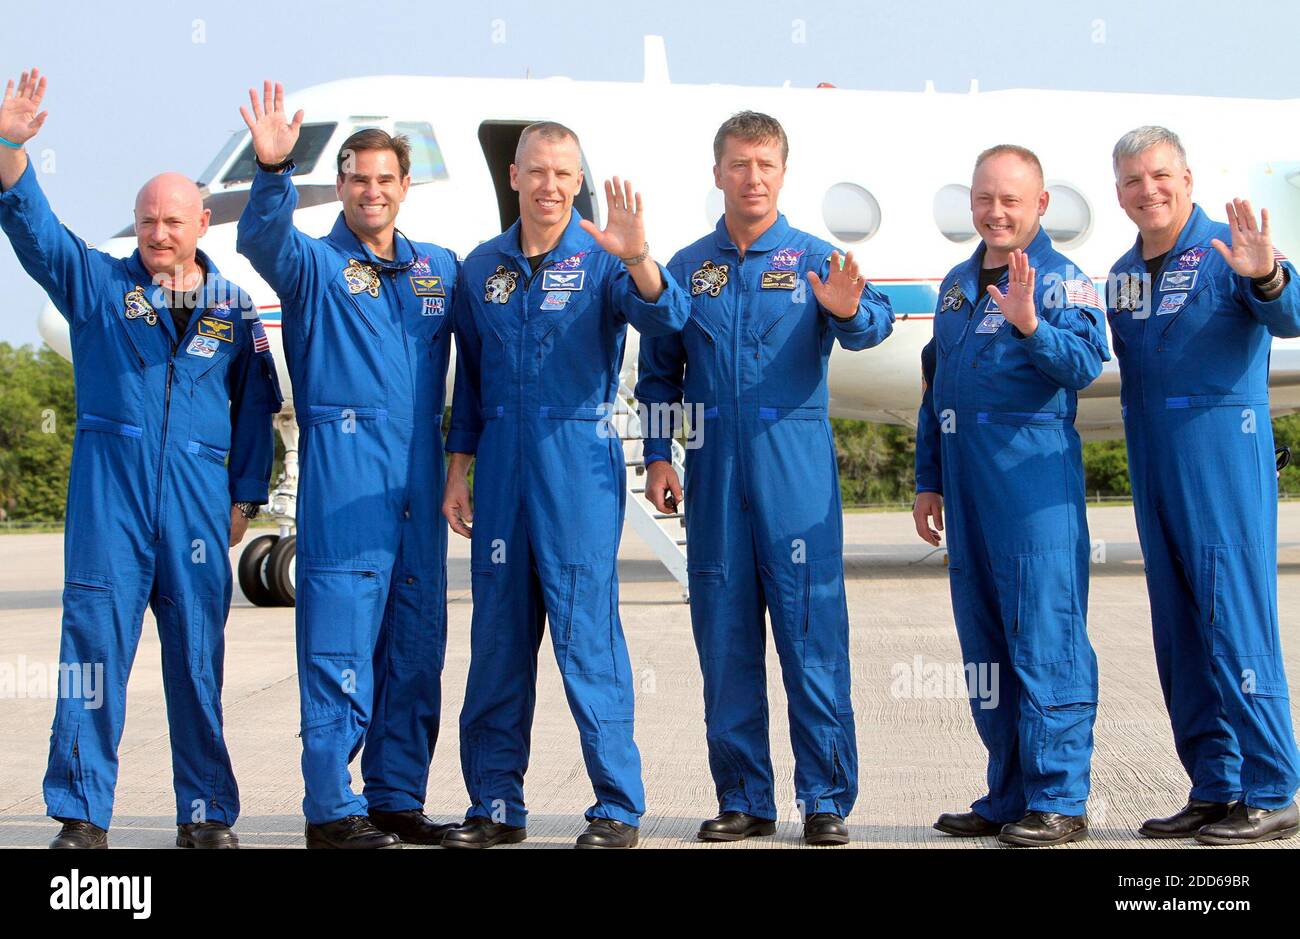 NO FILM, NO VIDEO, NO TV, NO DOCUMENTARY - The astronauts of space shuttle Endeavour, from left, commander Mark Kelly, Canadian born U.S. astronaut Greg Chamitoff, mission specialist Drew Feustel, European Space Agency astronaut Roberto Vittori, of Italy, mission specialist Mike Fincke and British born U.S. astronaut, pilot Greg Johnson, gather for a photo after arriving at the Kennedy Space Center in Cape Canaveral, Florida, Thursday, May 12, 2011. Photo by Red Huber/Orlando Sentinel/MCT/ABACAPRESS.COM Stock Photo